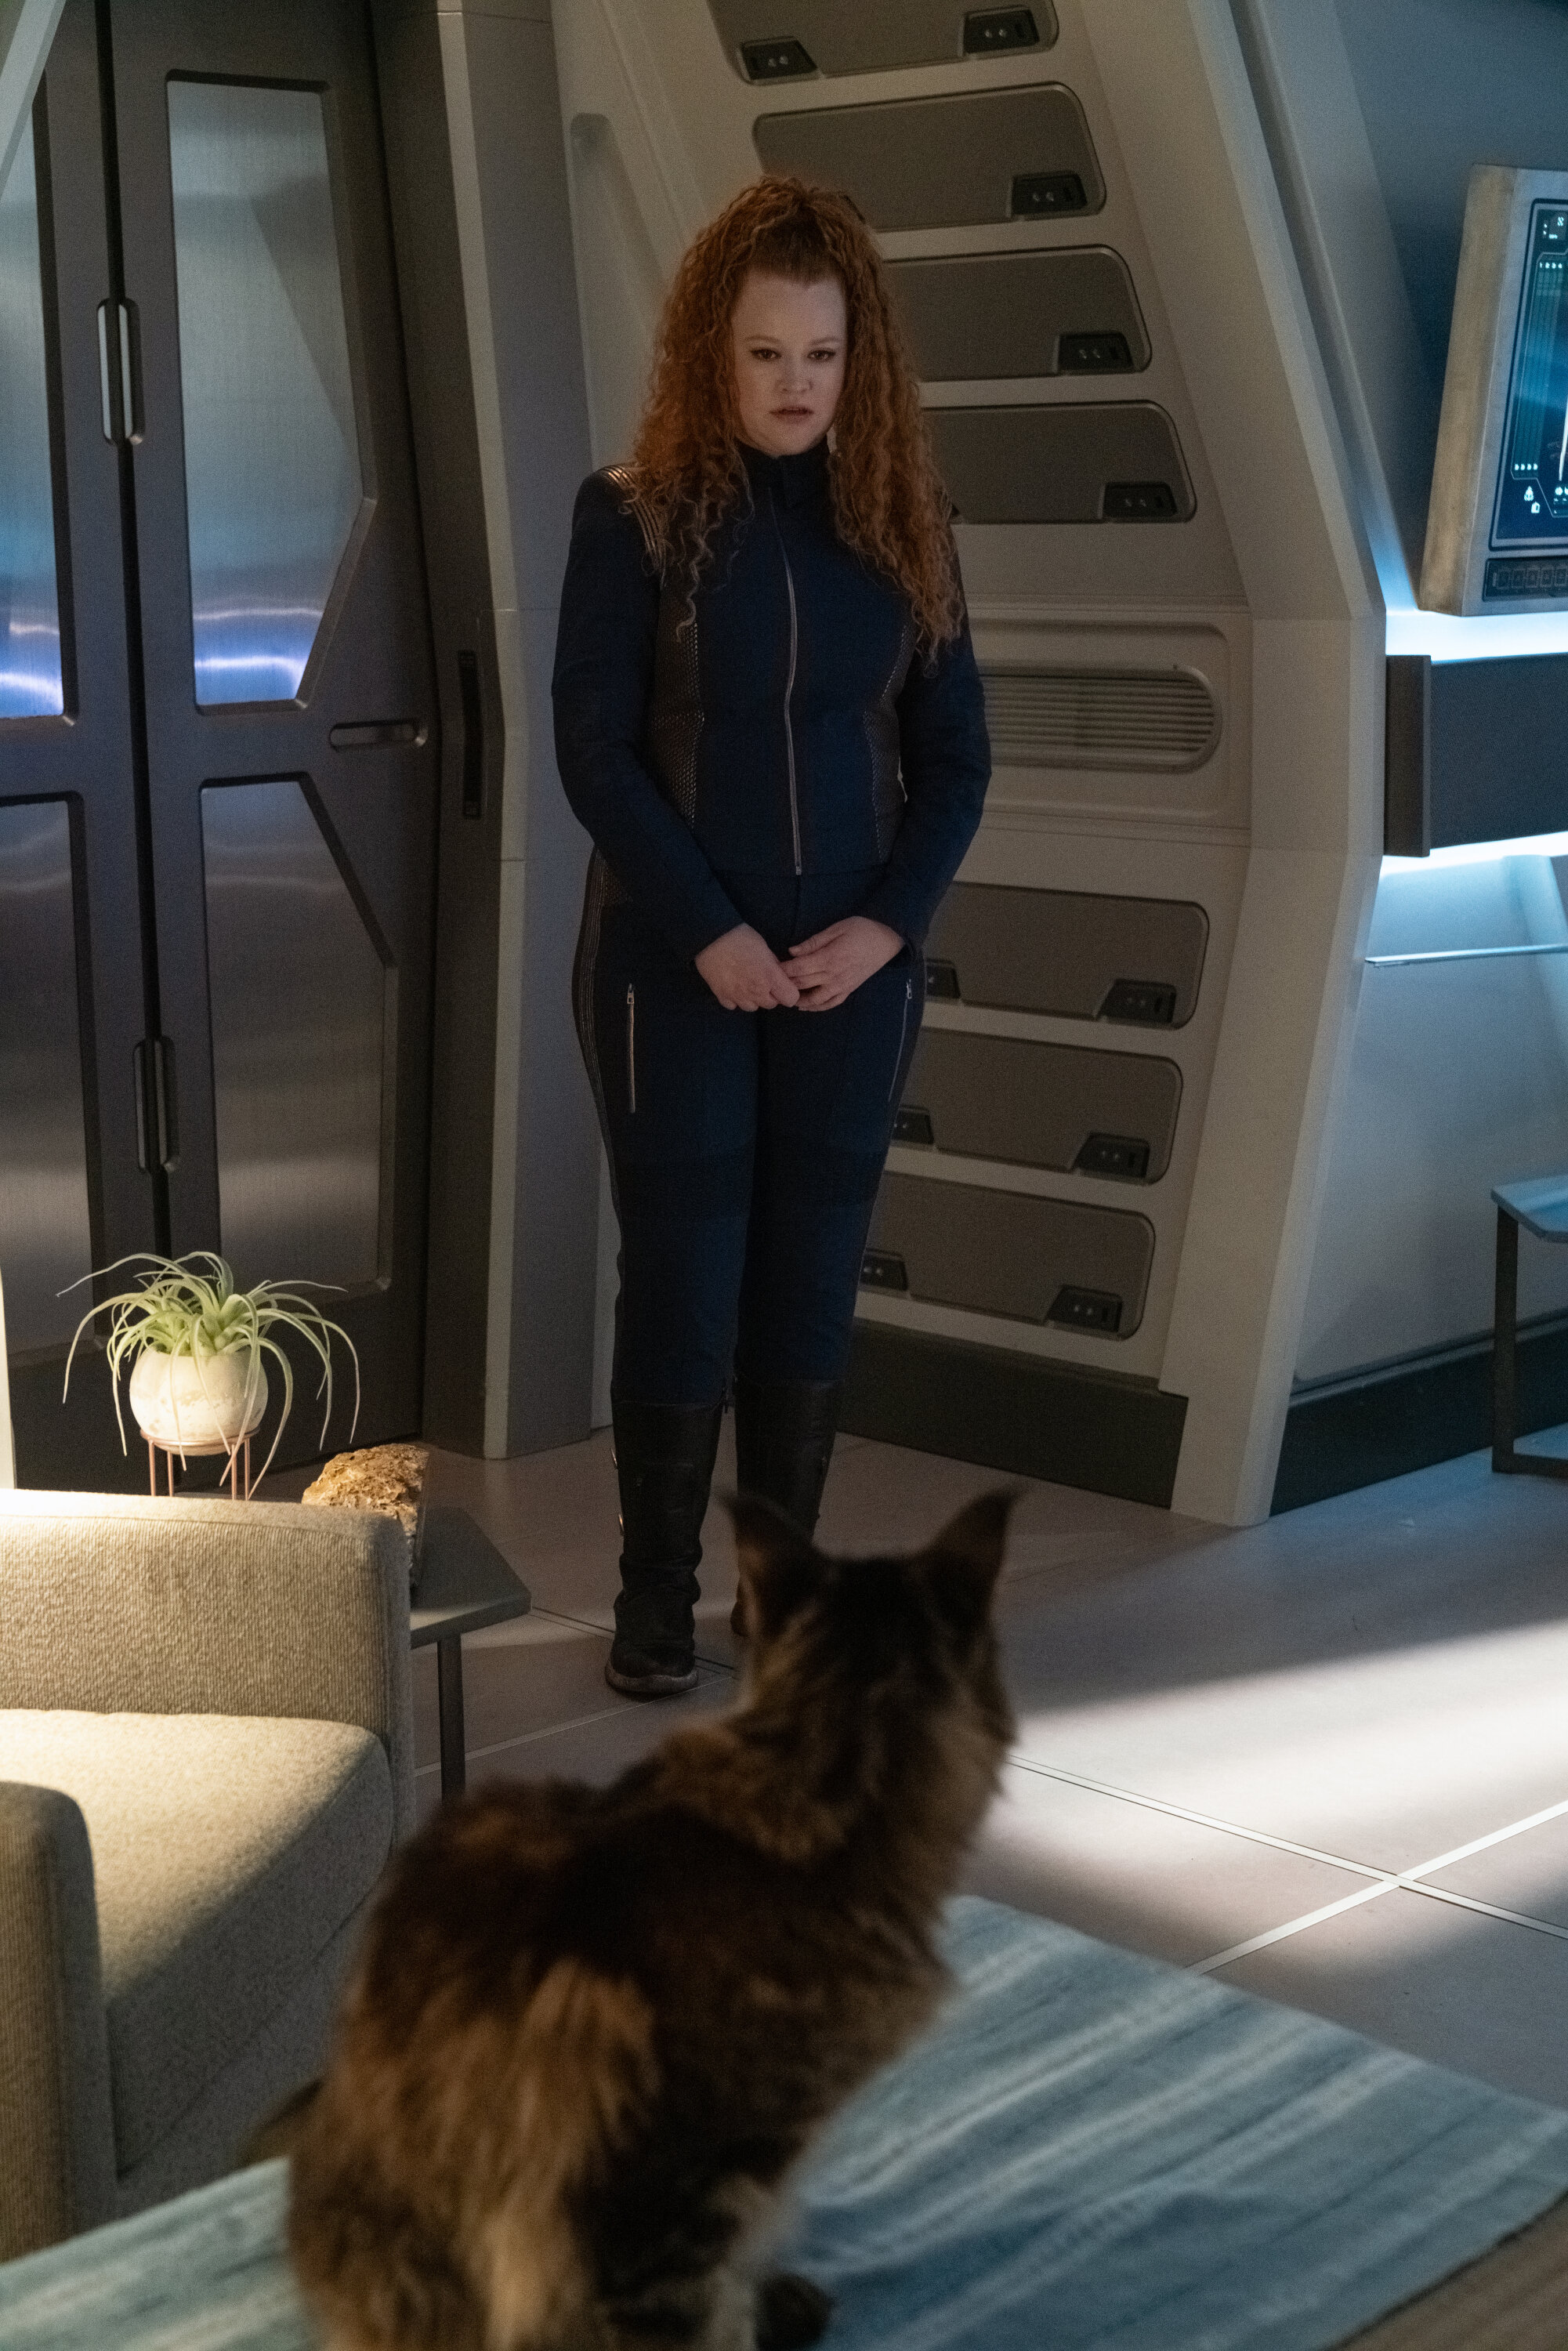   "Scavengers" -- Ep#306 -- Pictured: Mary Wiseman as Tilly of the CBS All Access series STAR TREK: DISCOVERY. Photo Cr: Michael Gibson/CBS ©2020 CBS Interactive, Inc. All Rights Reserved.  